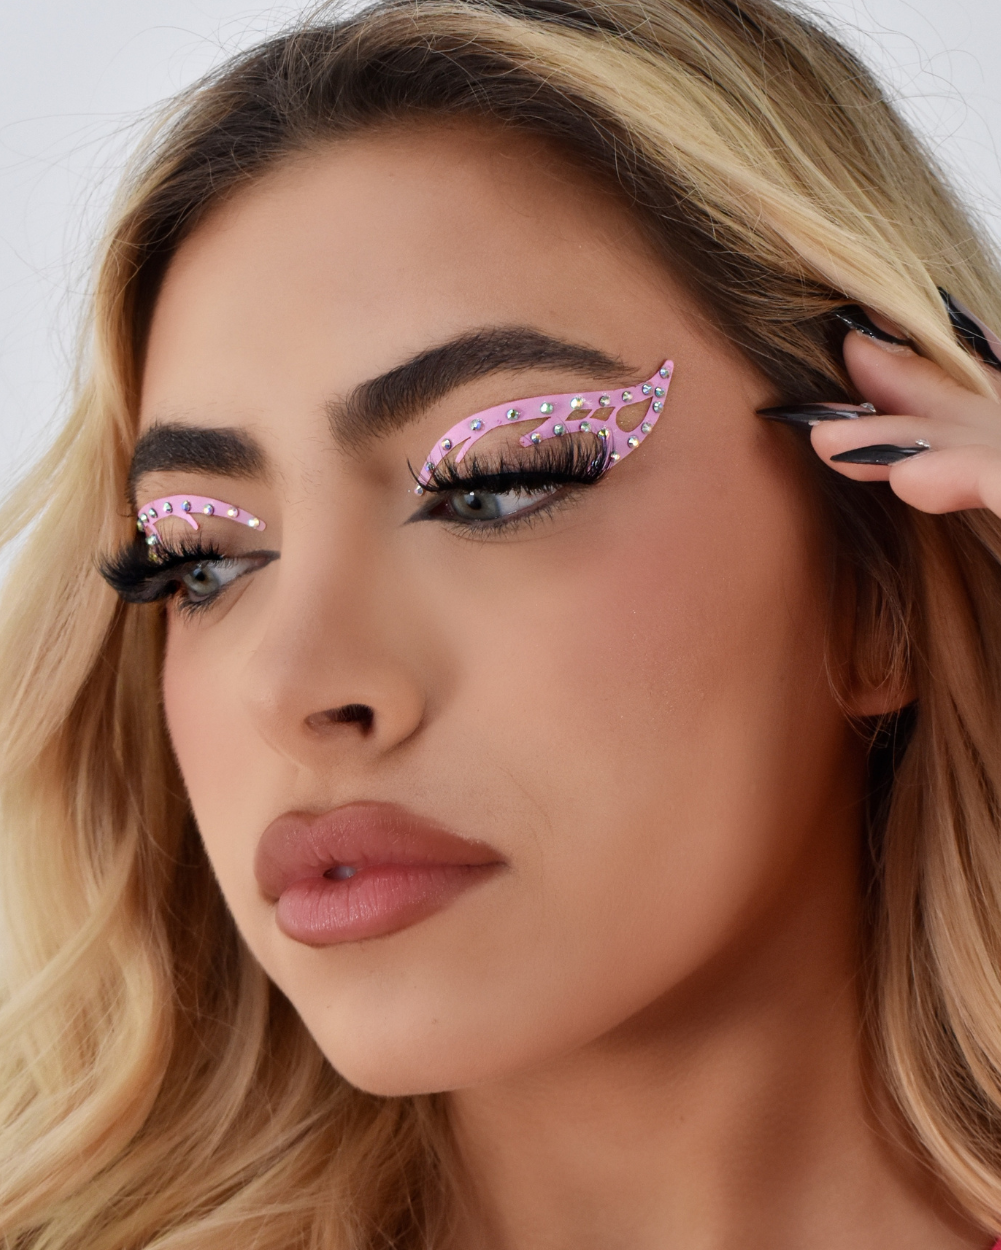 Garden Party - Pink Butterfly Rhinestone Graphic Eye Liner Face Jewels - Lunautics